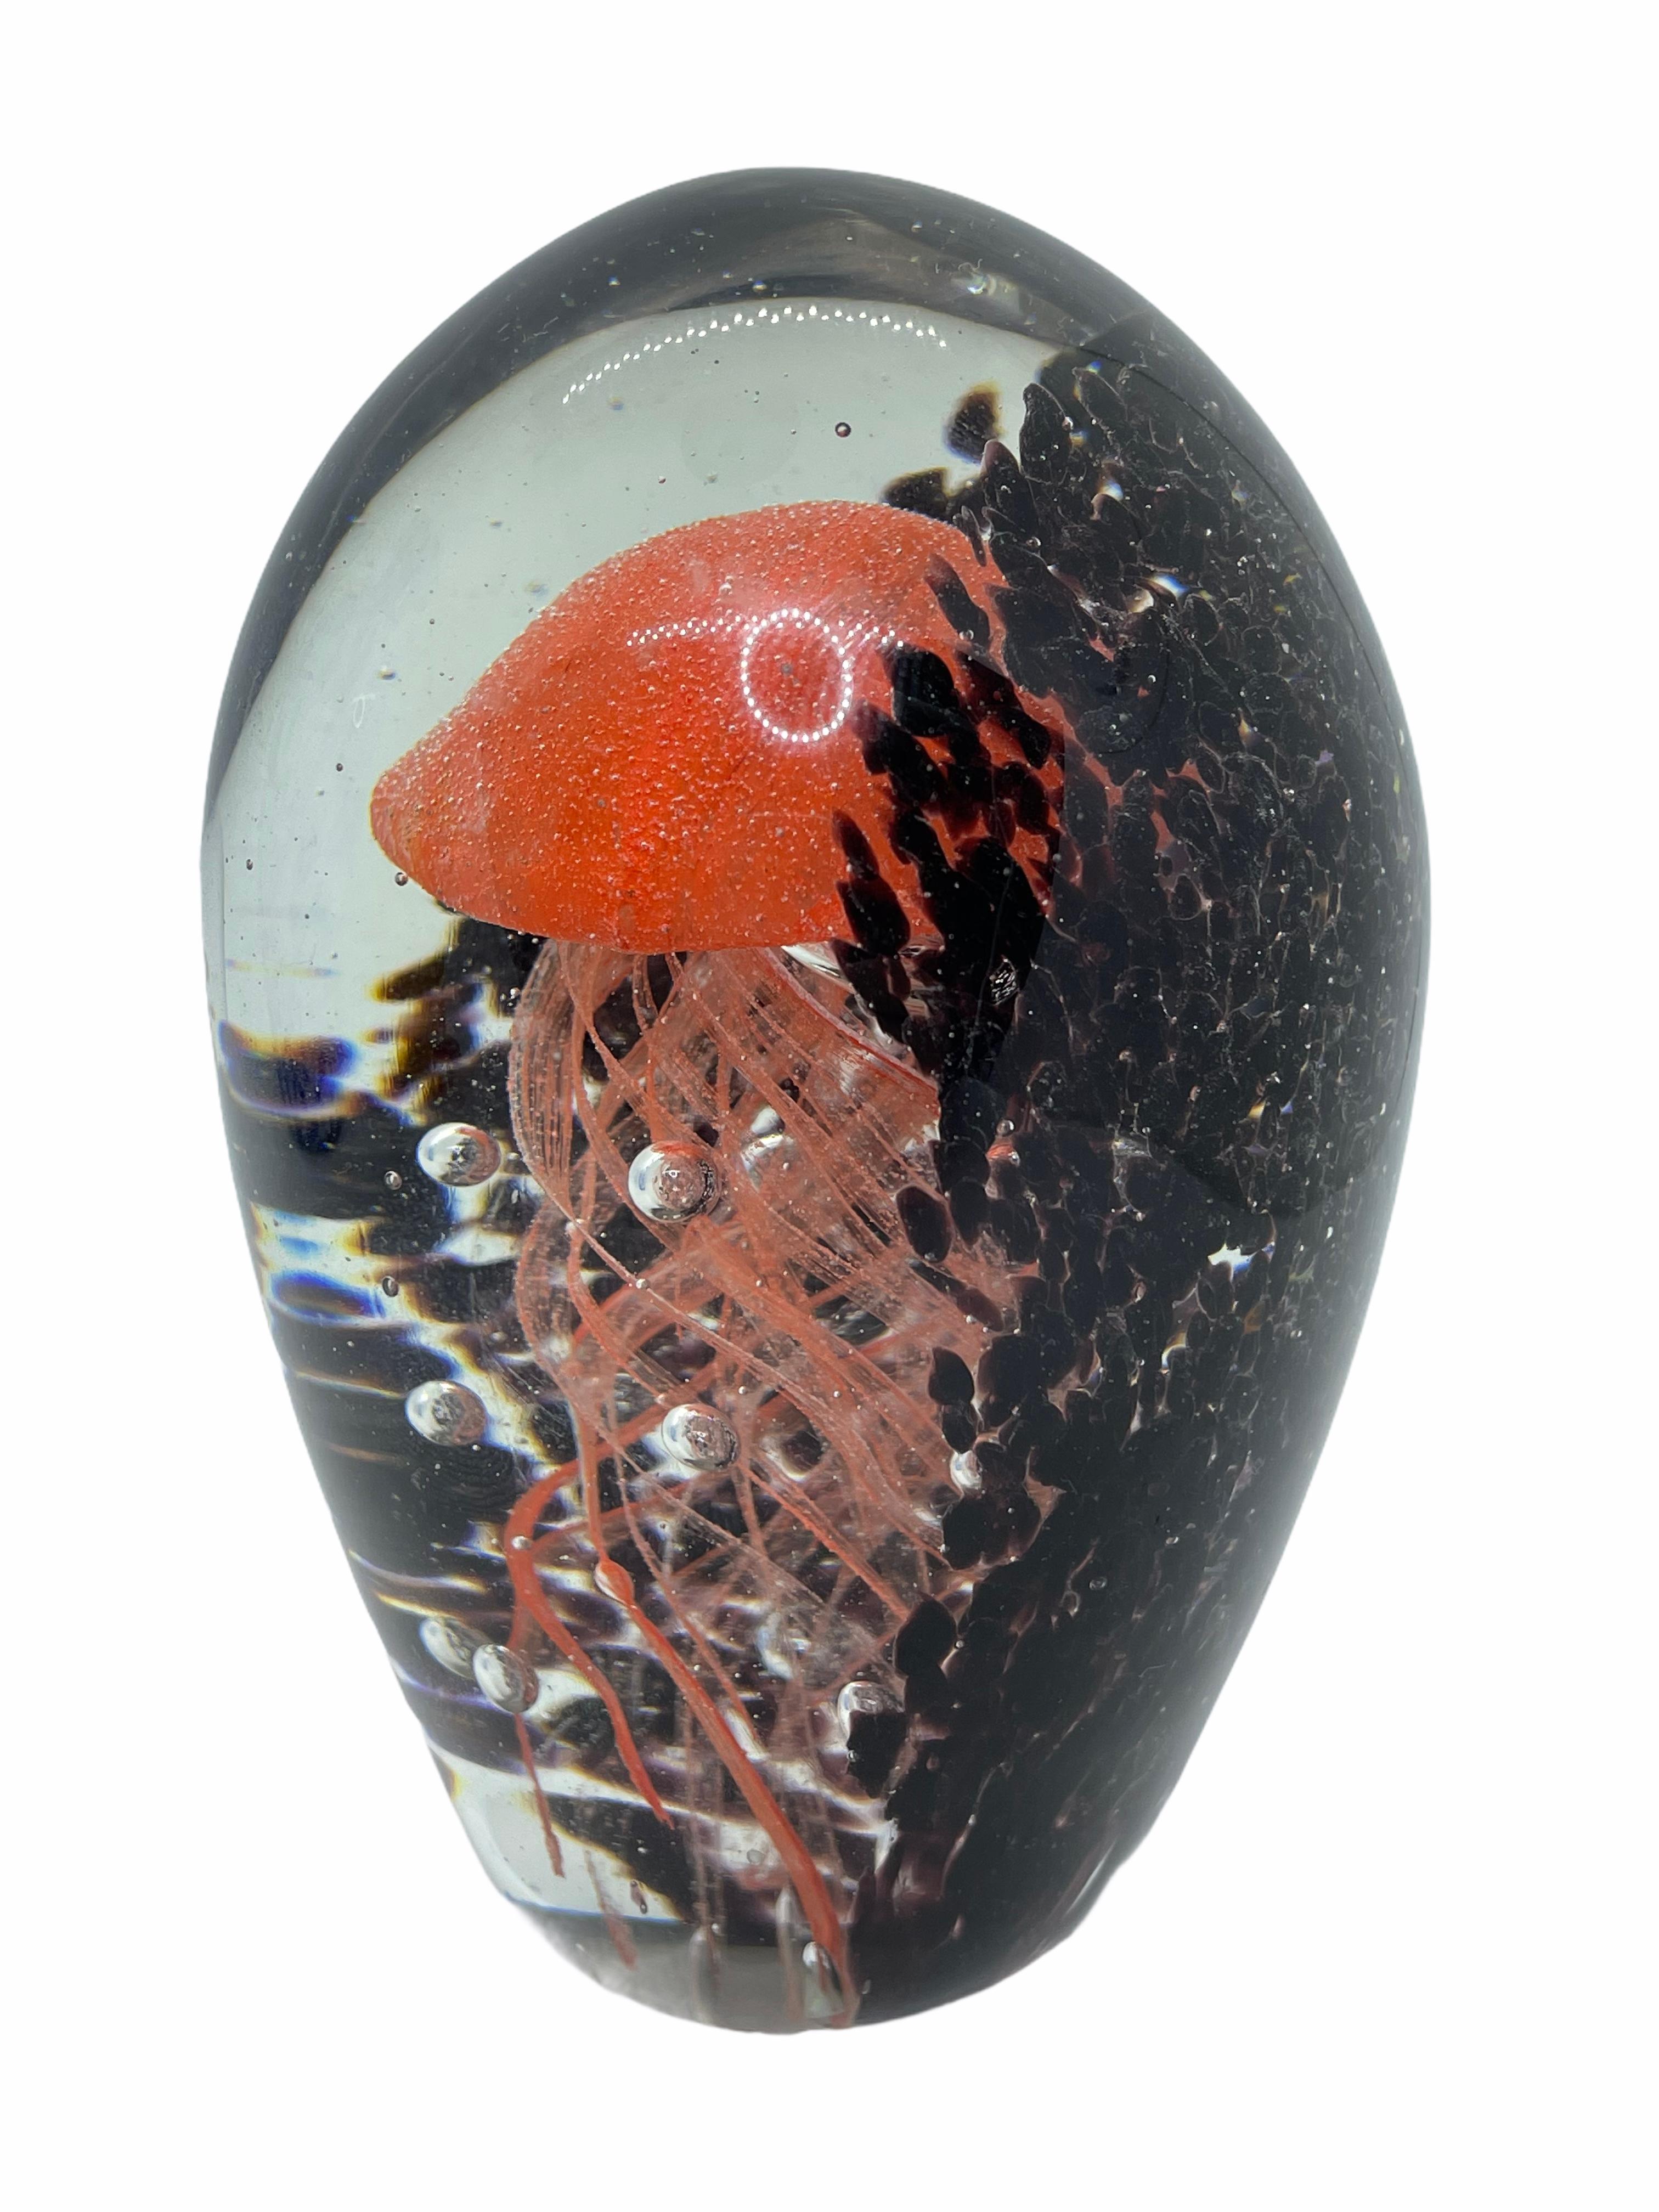 Beautiful Murano hand blown aquarium Italian art glass paper weight. Showing a jelly fish, underwater floating on controlled bubbles. Colors are a black, orange and clear. A beautiful nice addition to your desktop or as a decorative piece in every